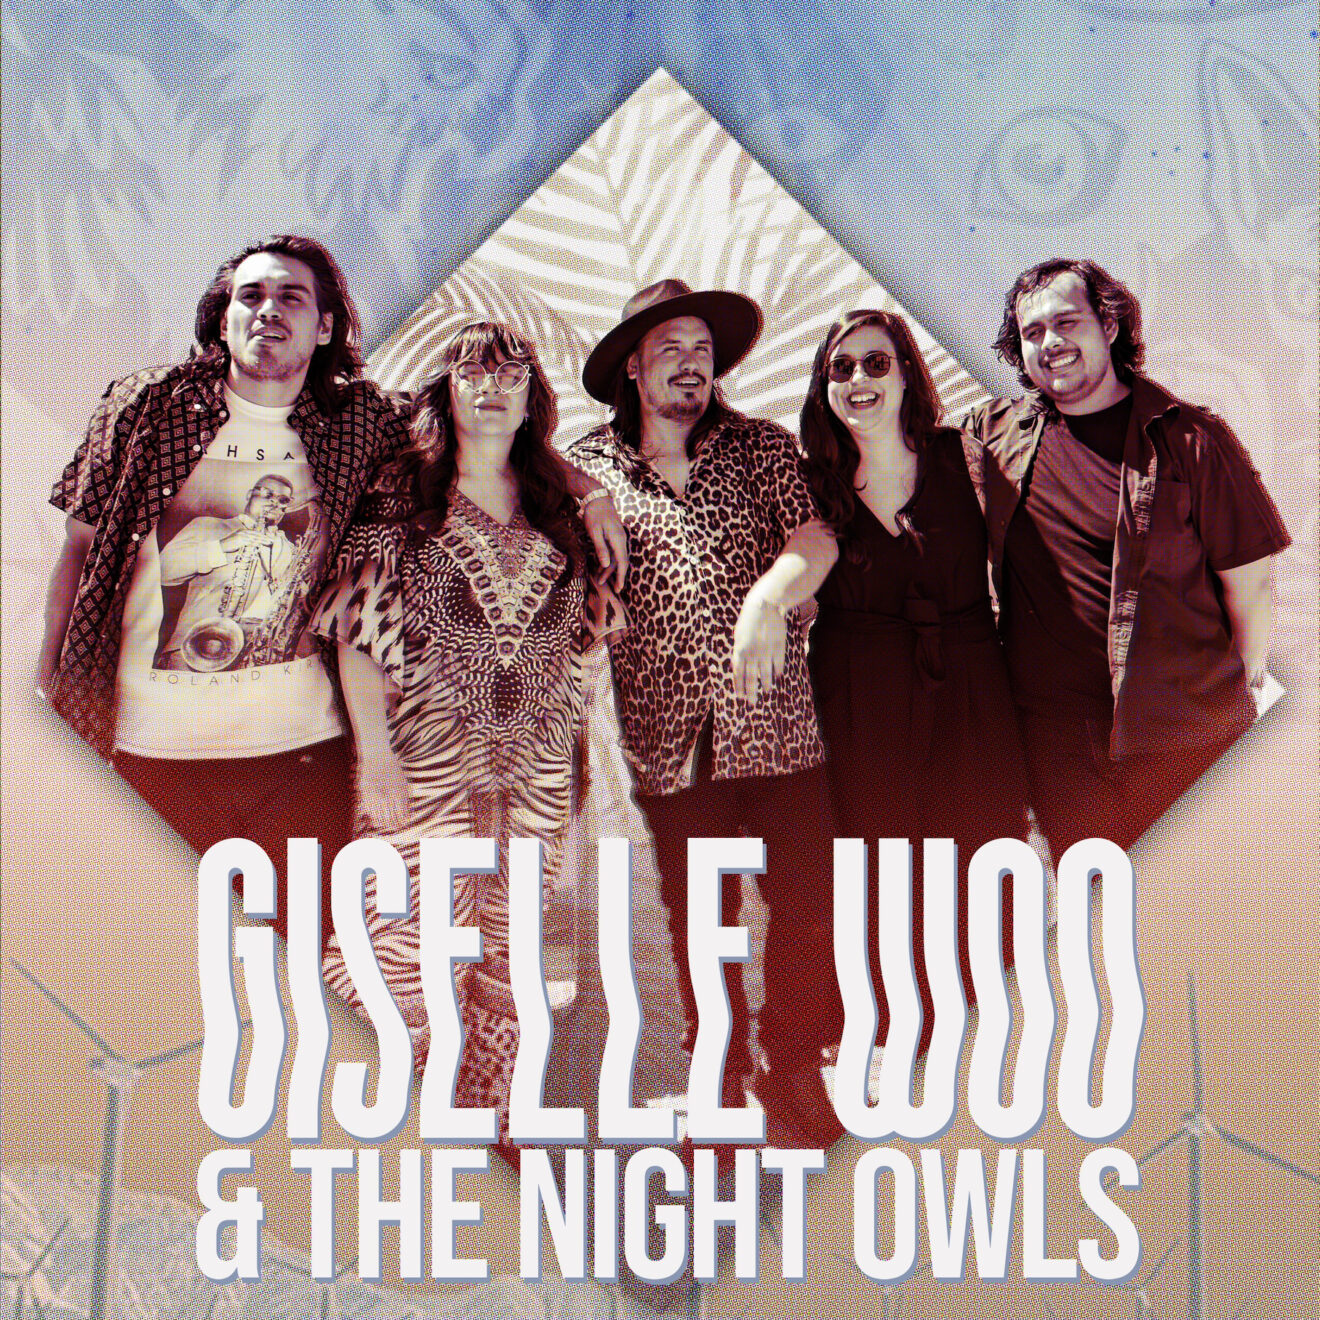 Tastes & Sounds of Cathedral City - Giselle Woo and the Night Owls